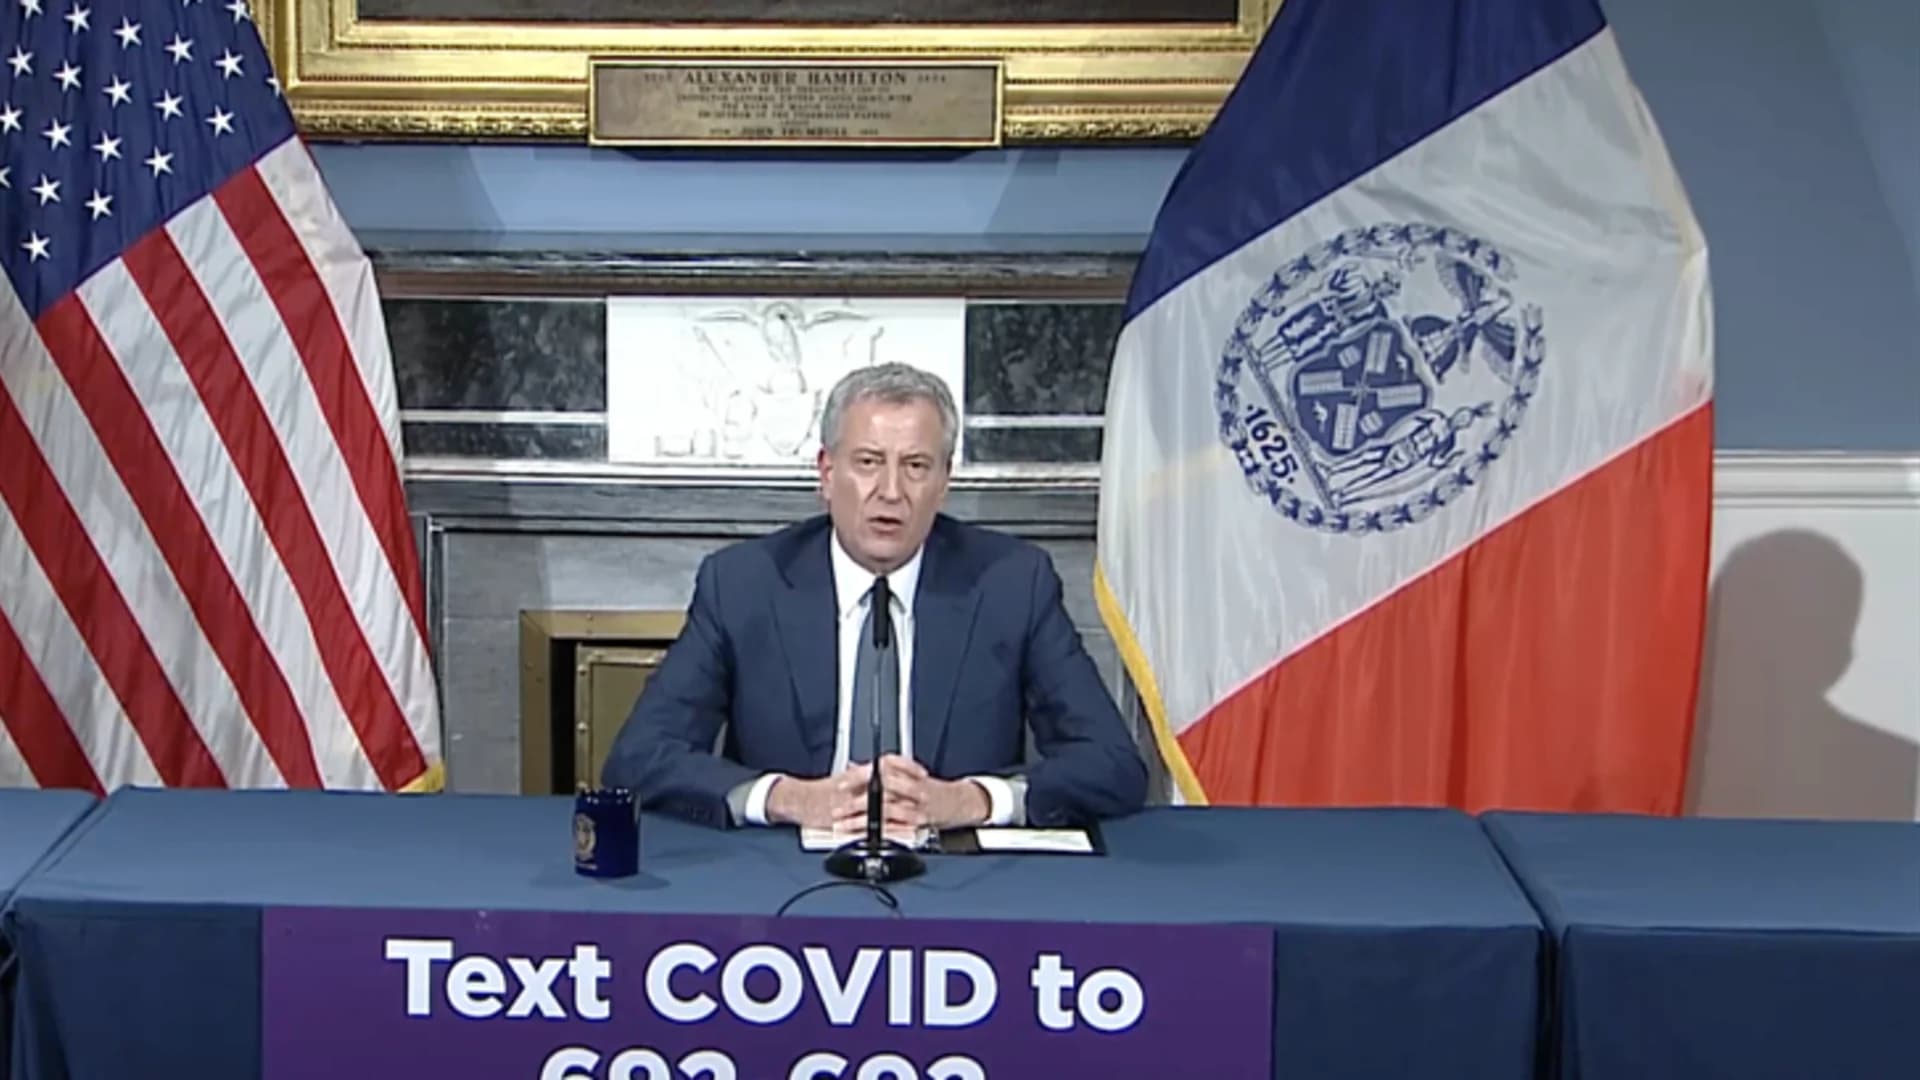 'We are now the epicenter.' Mayor says NYC coronavirus cases soar to 5,683